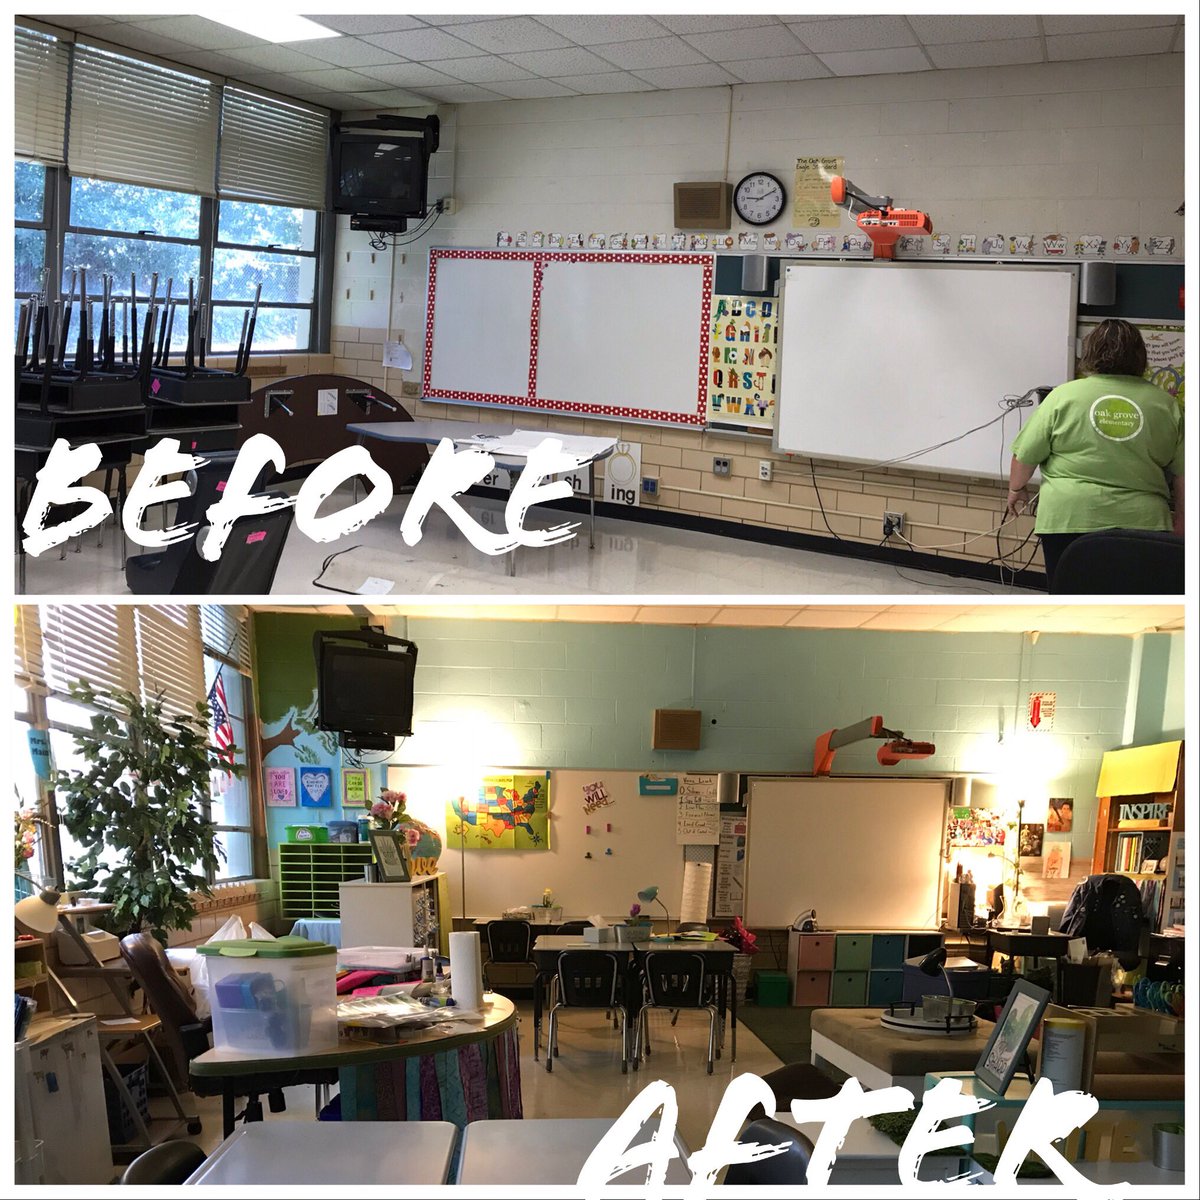 I put in a lot of hours this summer to make over my new room. A fresh coat of paint and flexible seating make for a great climate of learning! @OakGroveElem @DeKalbSchools #iLoveDCSD #classroomclimate #classroommakeover